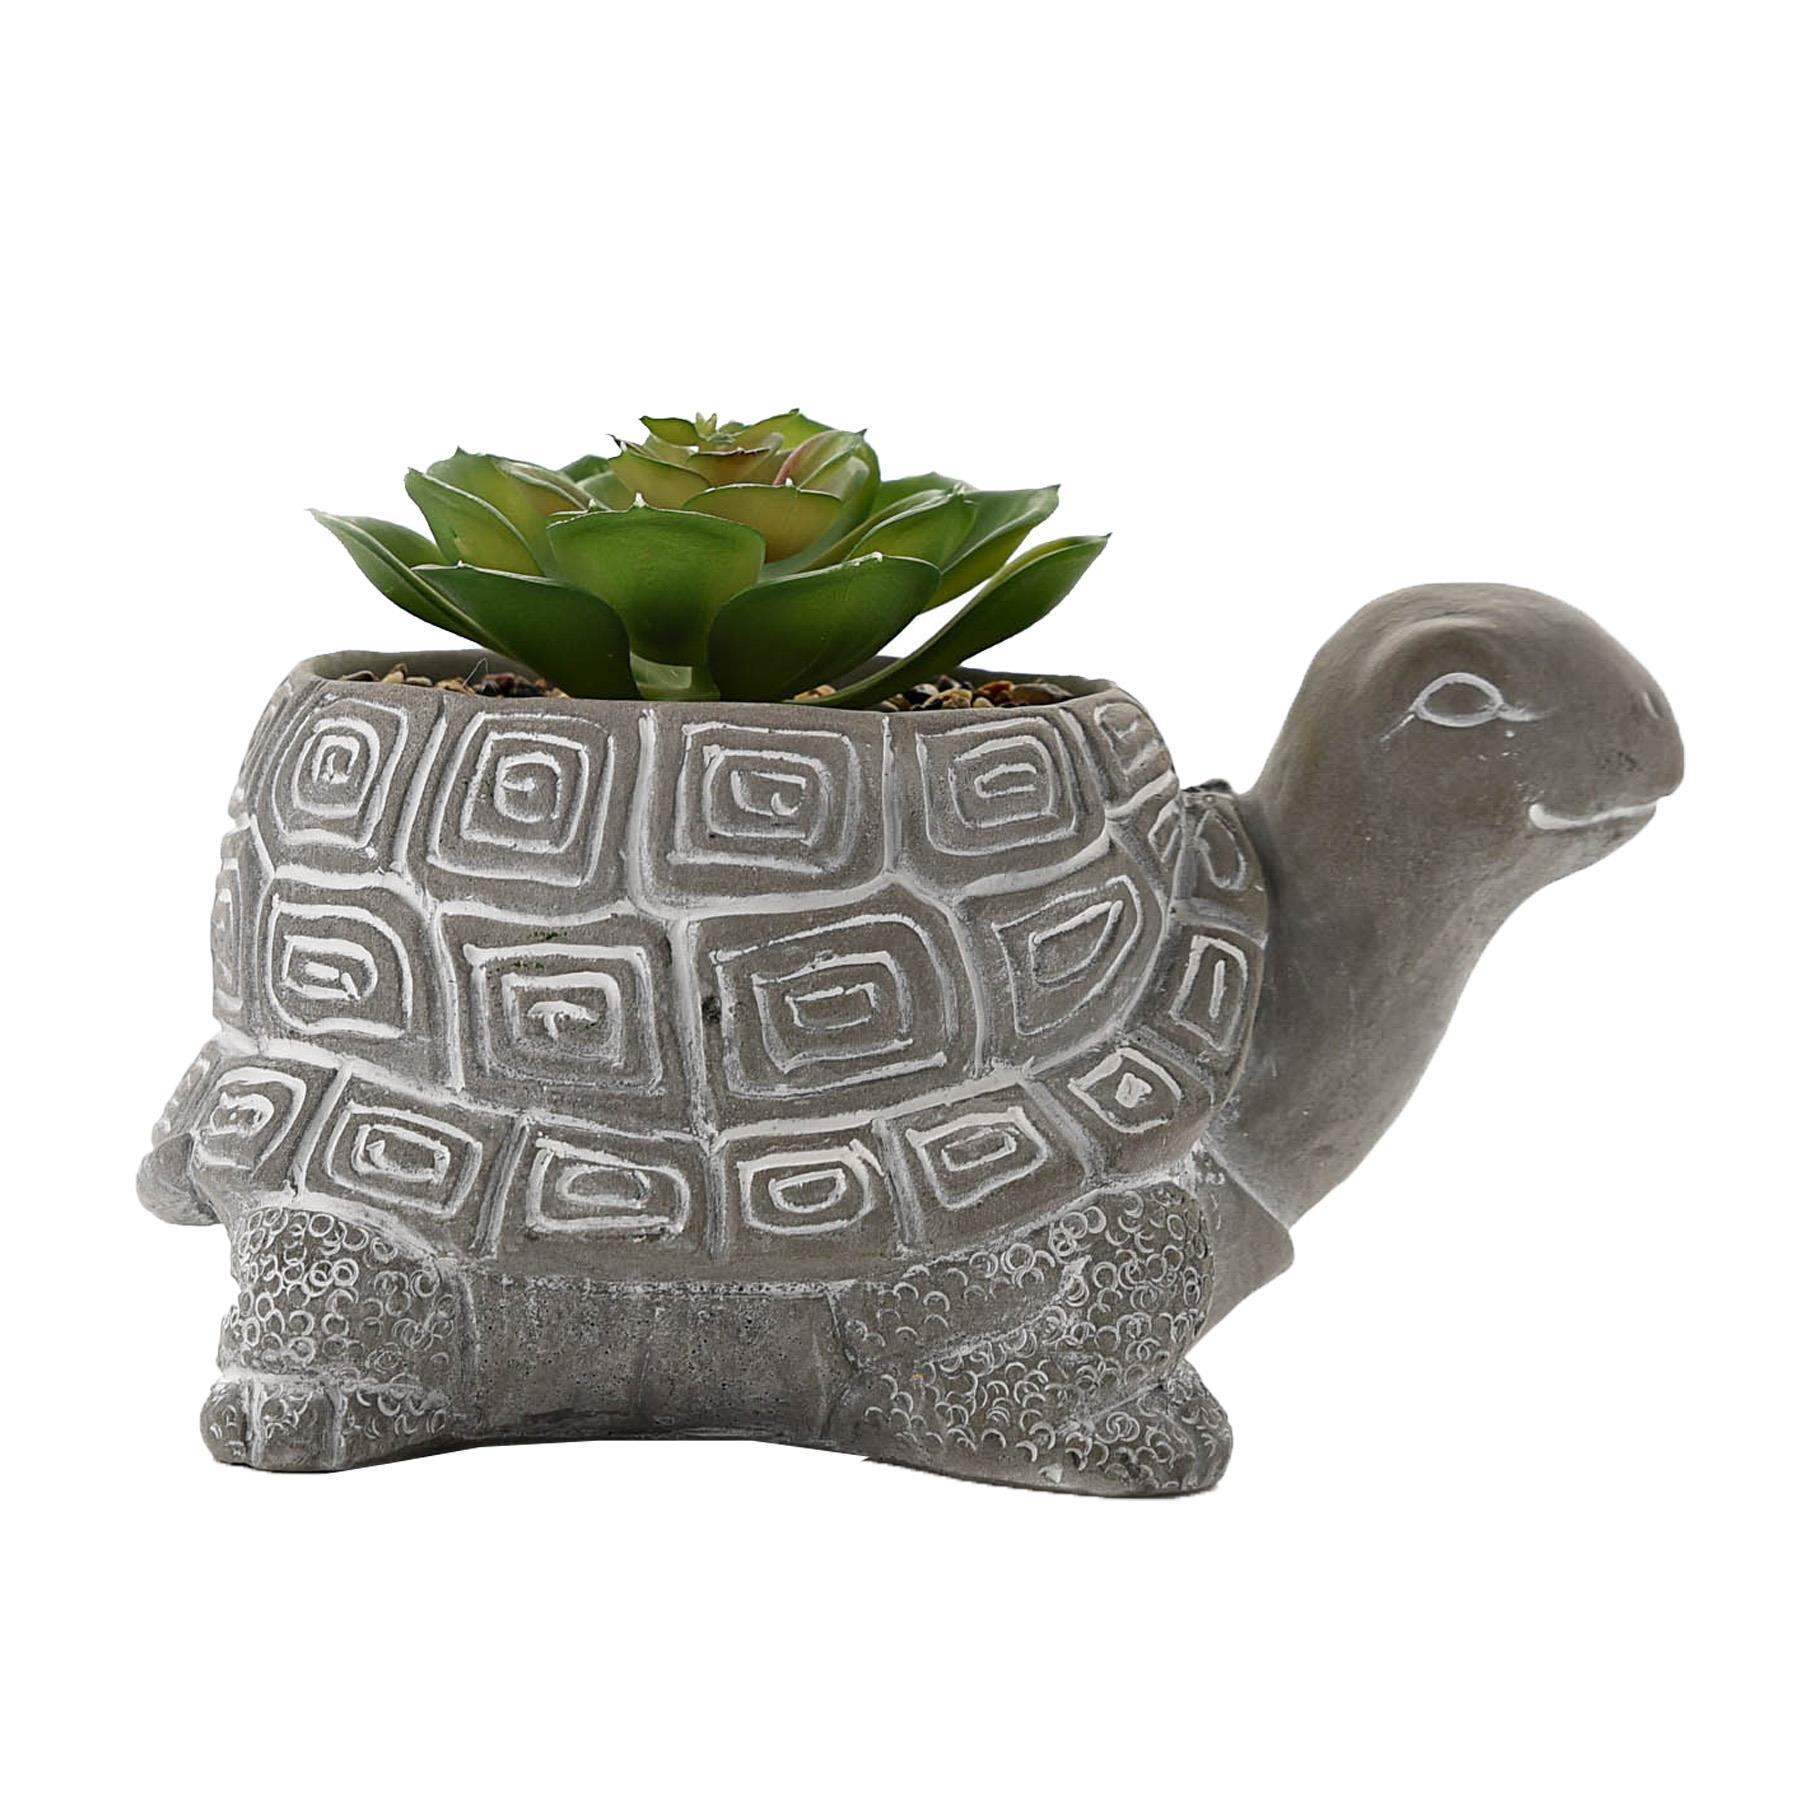 Cement Effect Animal Planter with Succulent - Tortoise